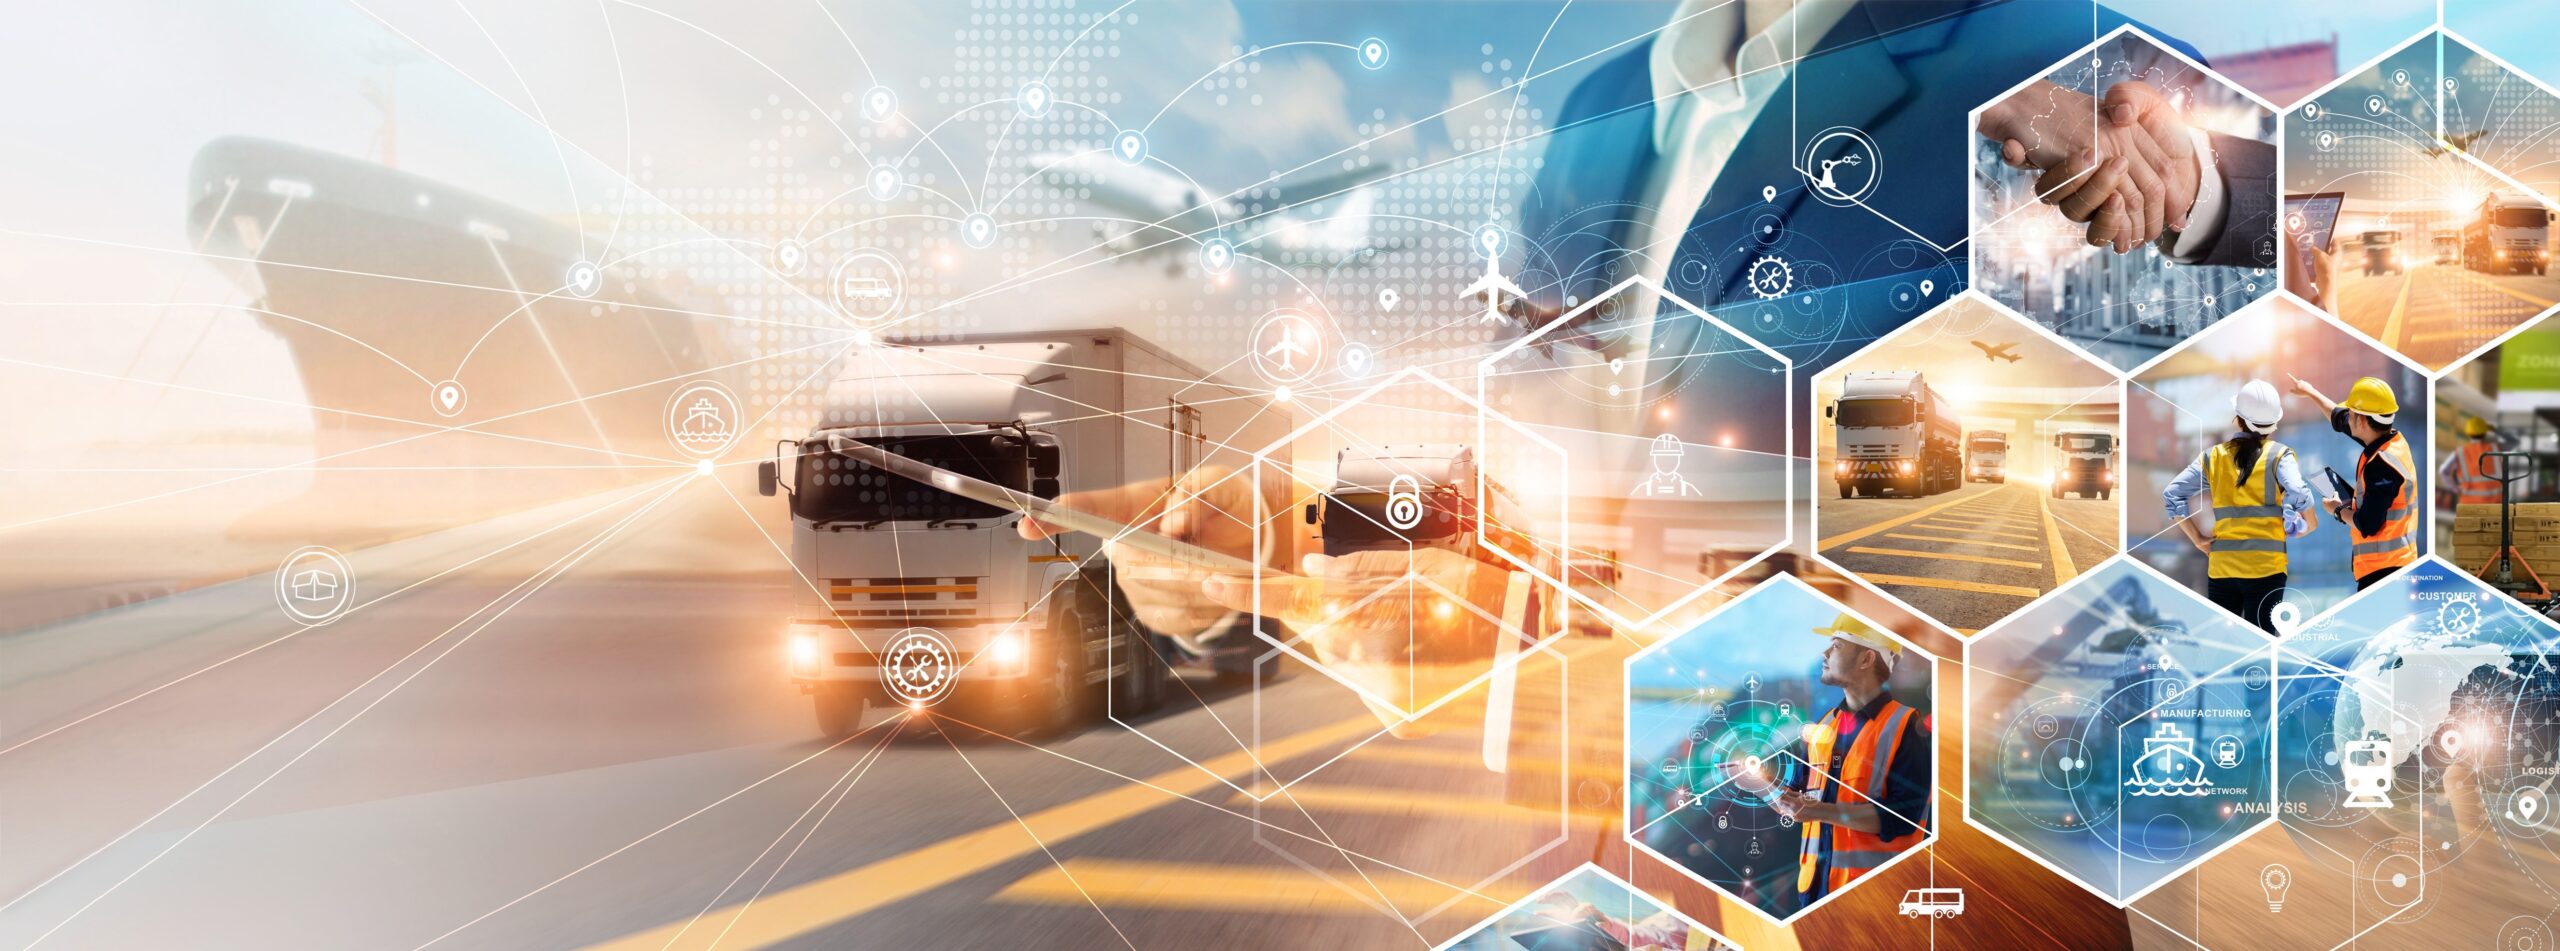 The Rise of Artificial Intelligence in 3PL Logistics: Transforming the Supply Chain and Fulfillment for the Benefit of Retailers and Customers